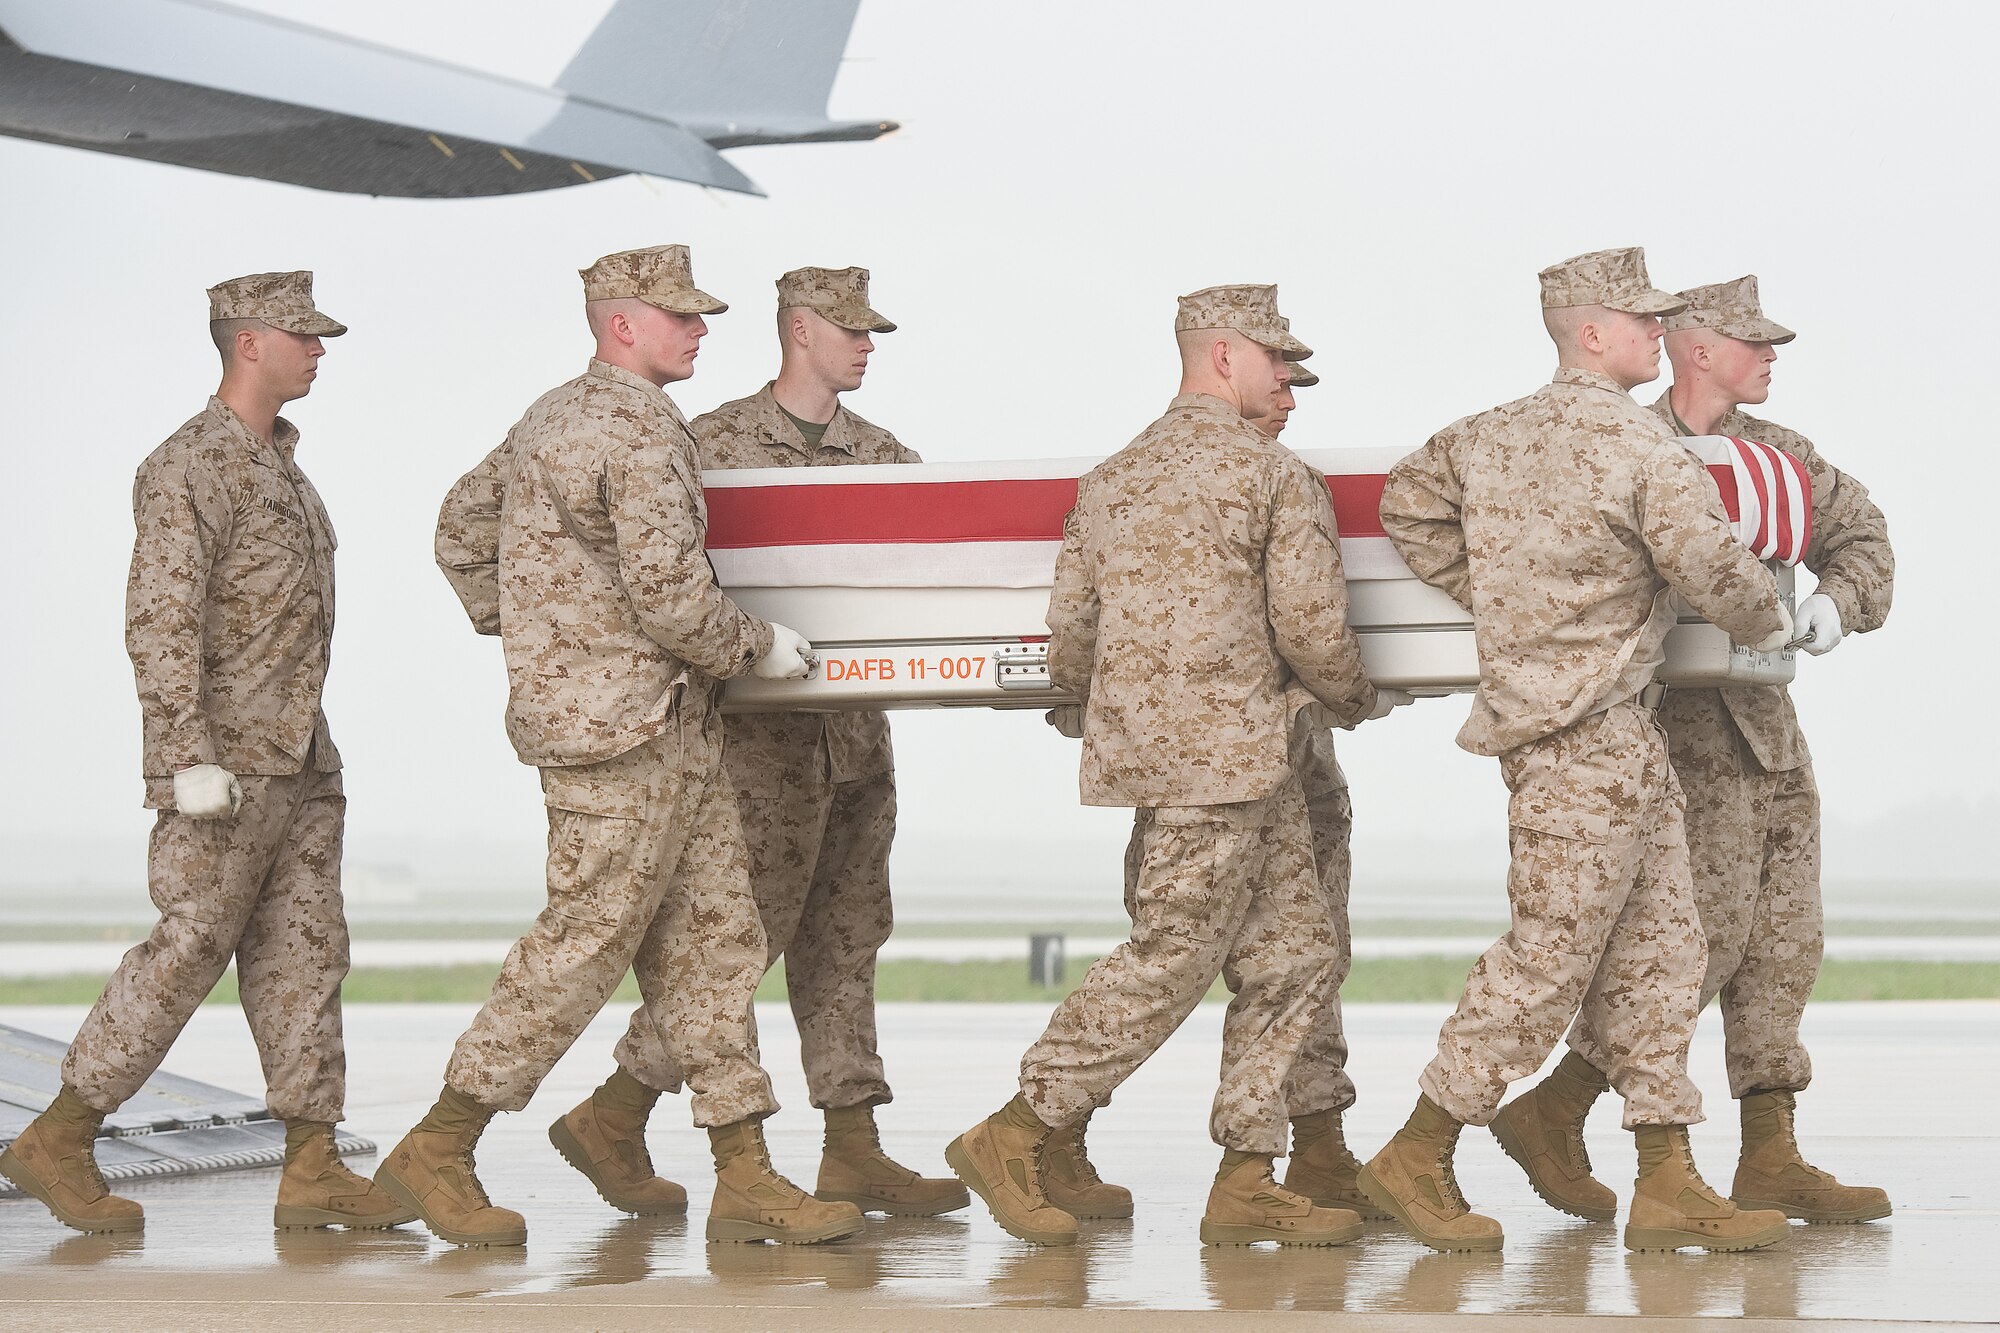 A U.S. Marine Corps carry team transfers the remains of Marine Staff Sgt. Eric D. Christian of Warwick, N.Y., at Dover Air Force Base, Del., May 7, 2013. Christian was assigned to 2nd Marine Special Operations Battalion, Camp Lejeune, N.C. (U.S. Air Force photo/Roland Balik)